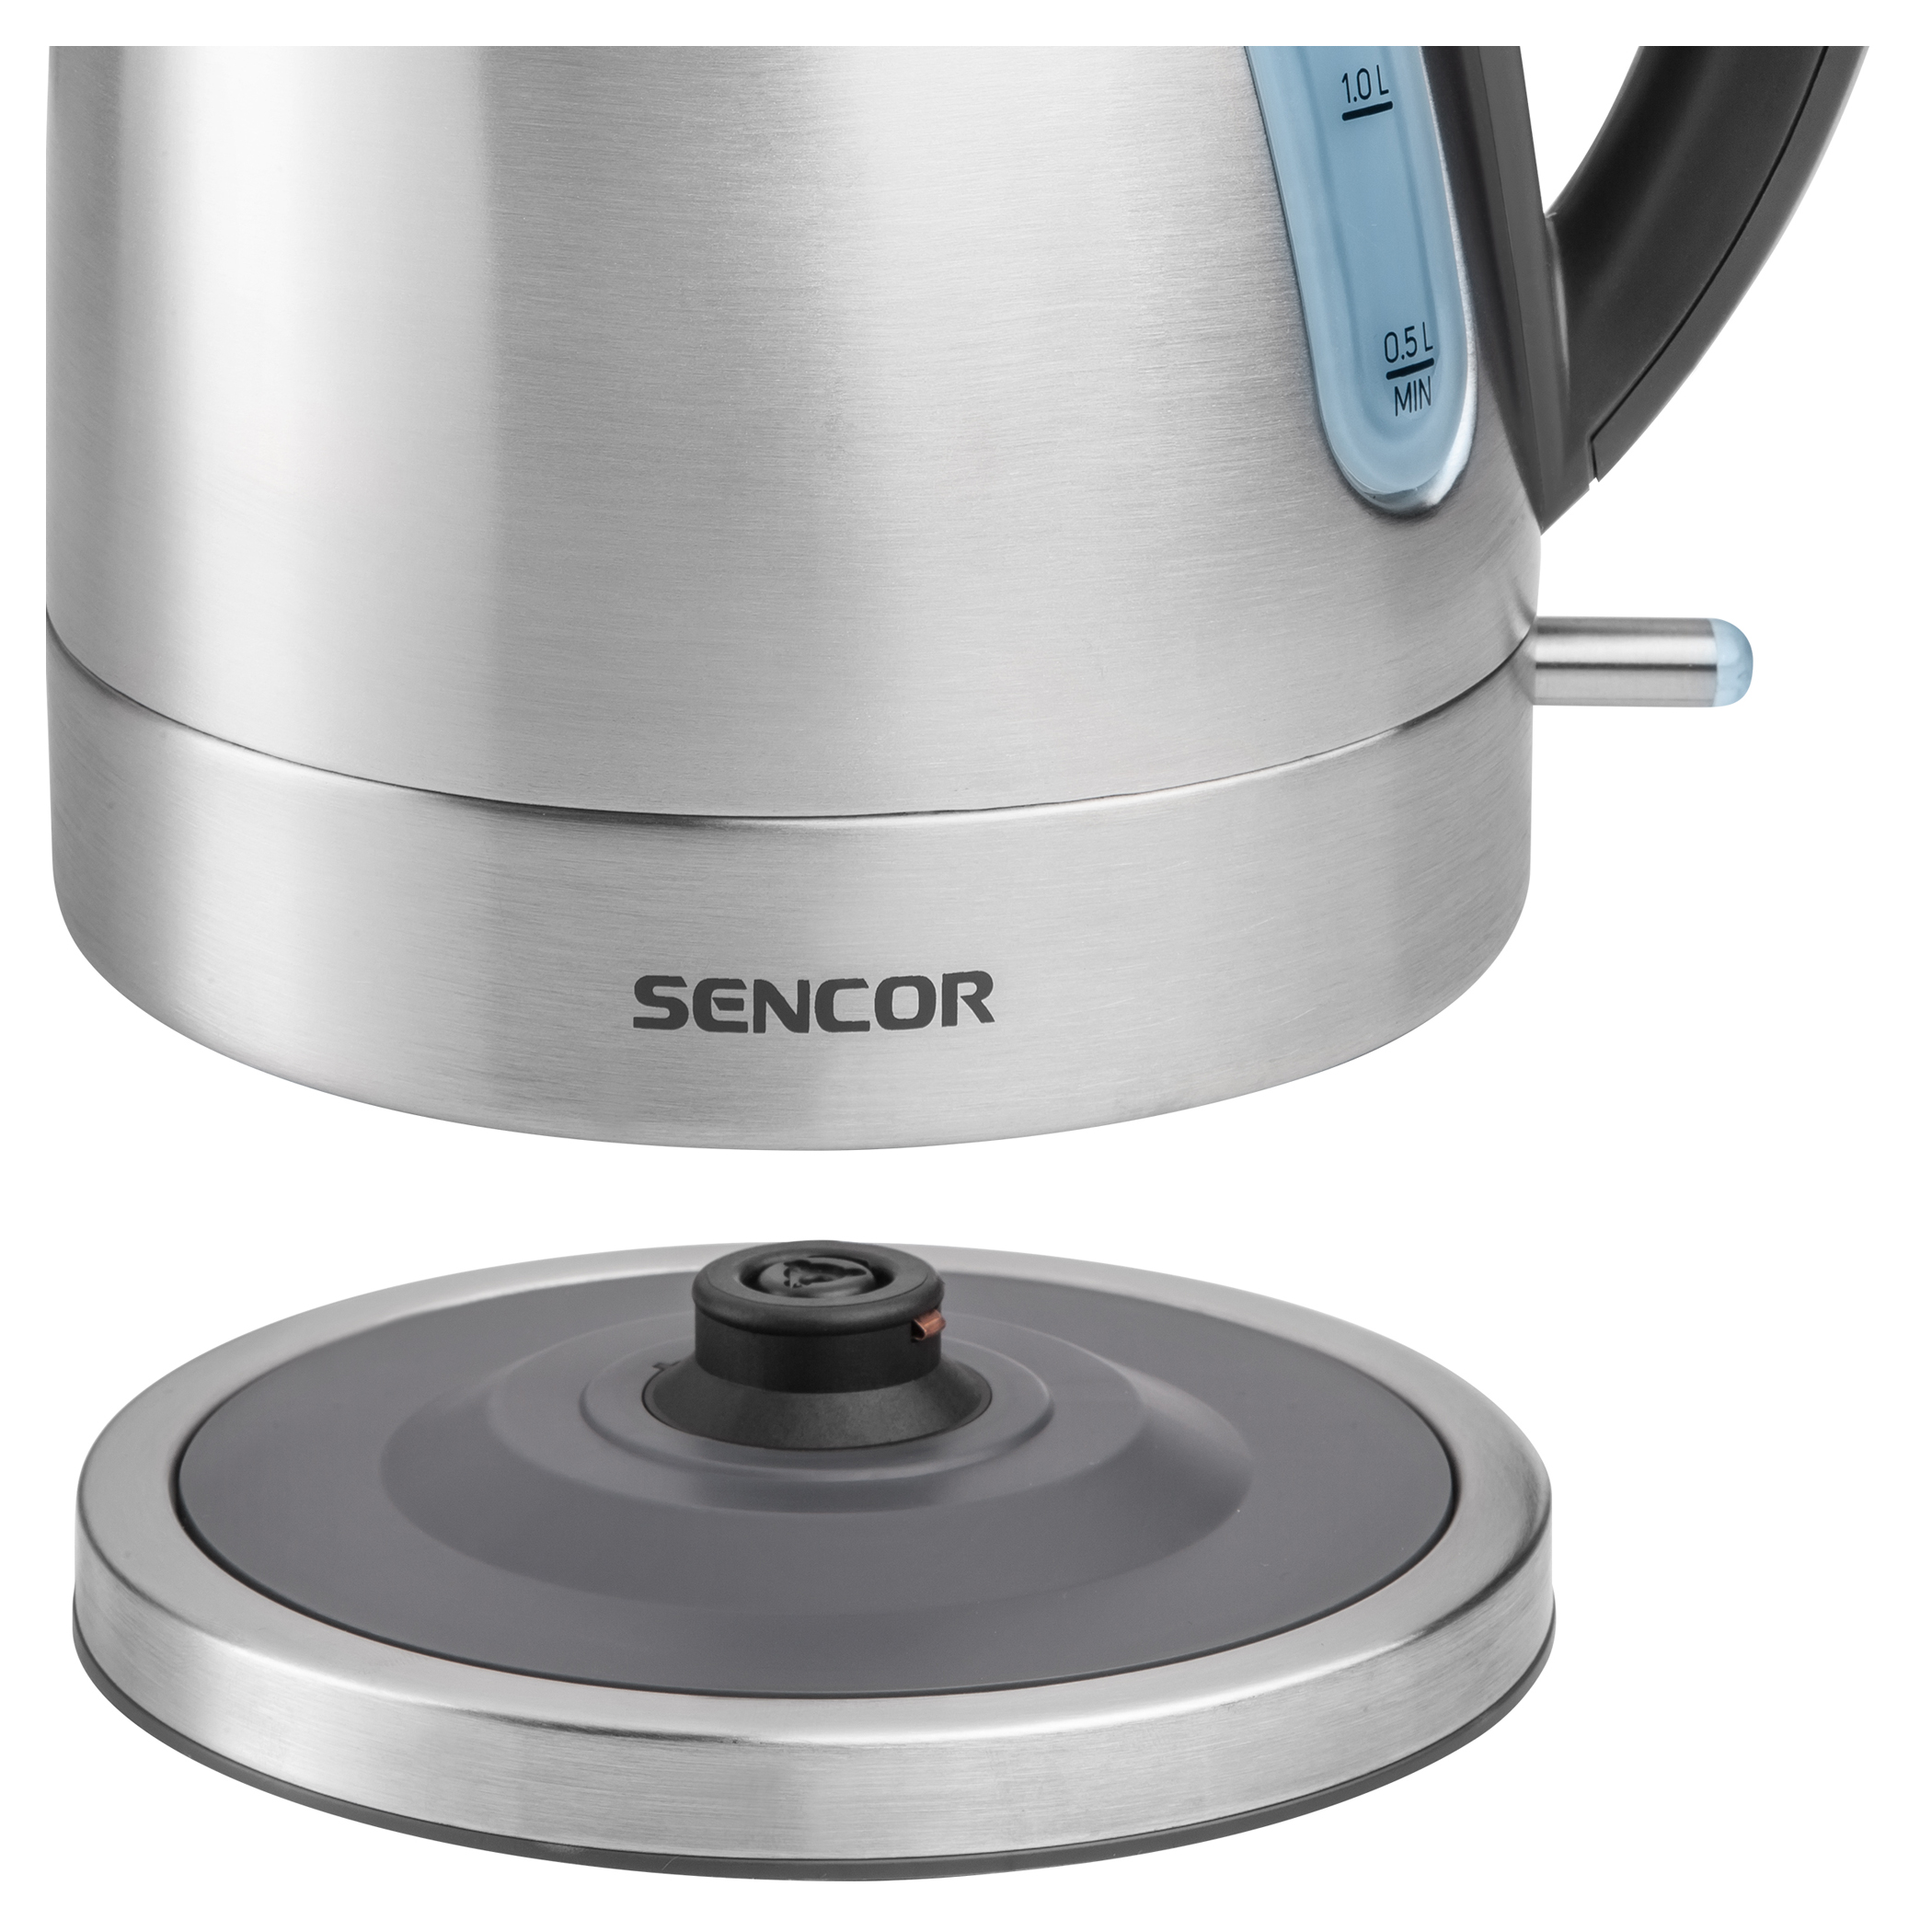 Sencor SWK44RD Crystal Electric Kettle with Power Cord Base, Coral